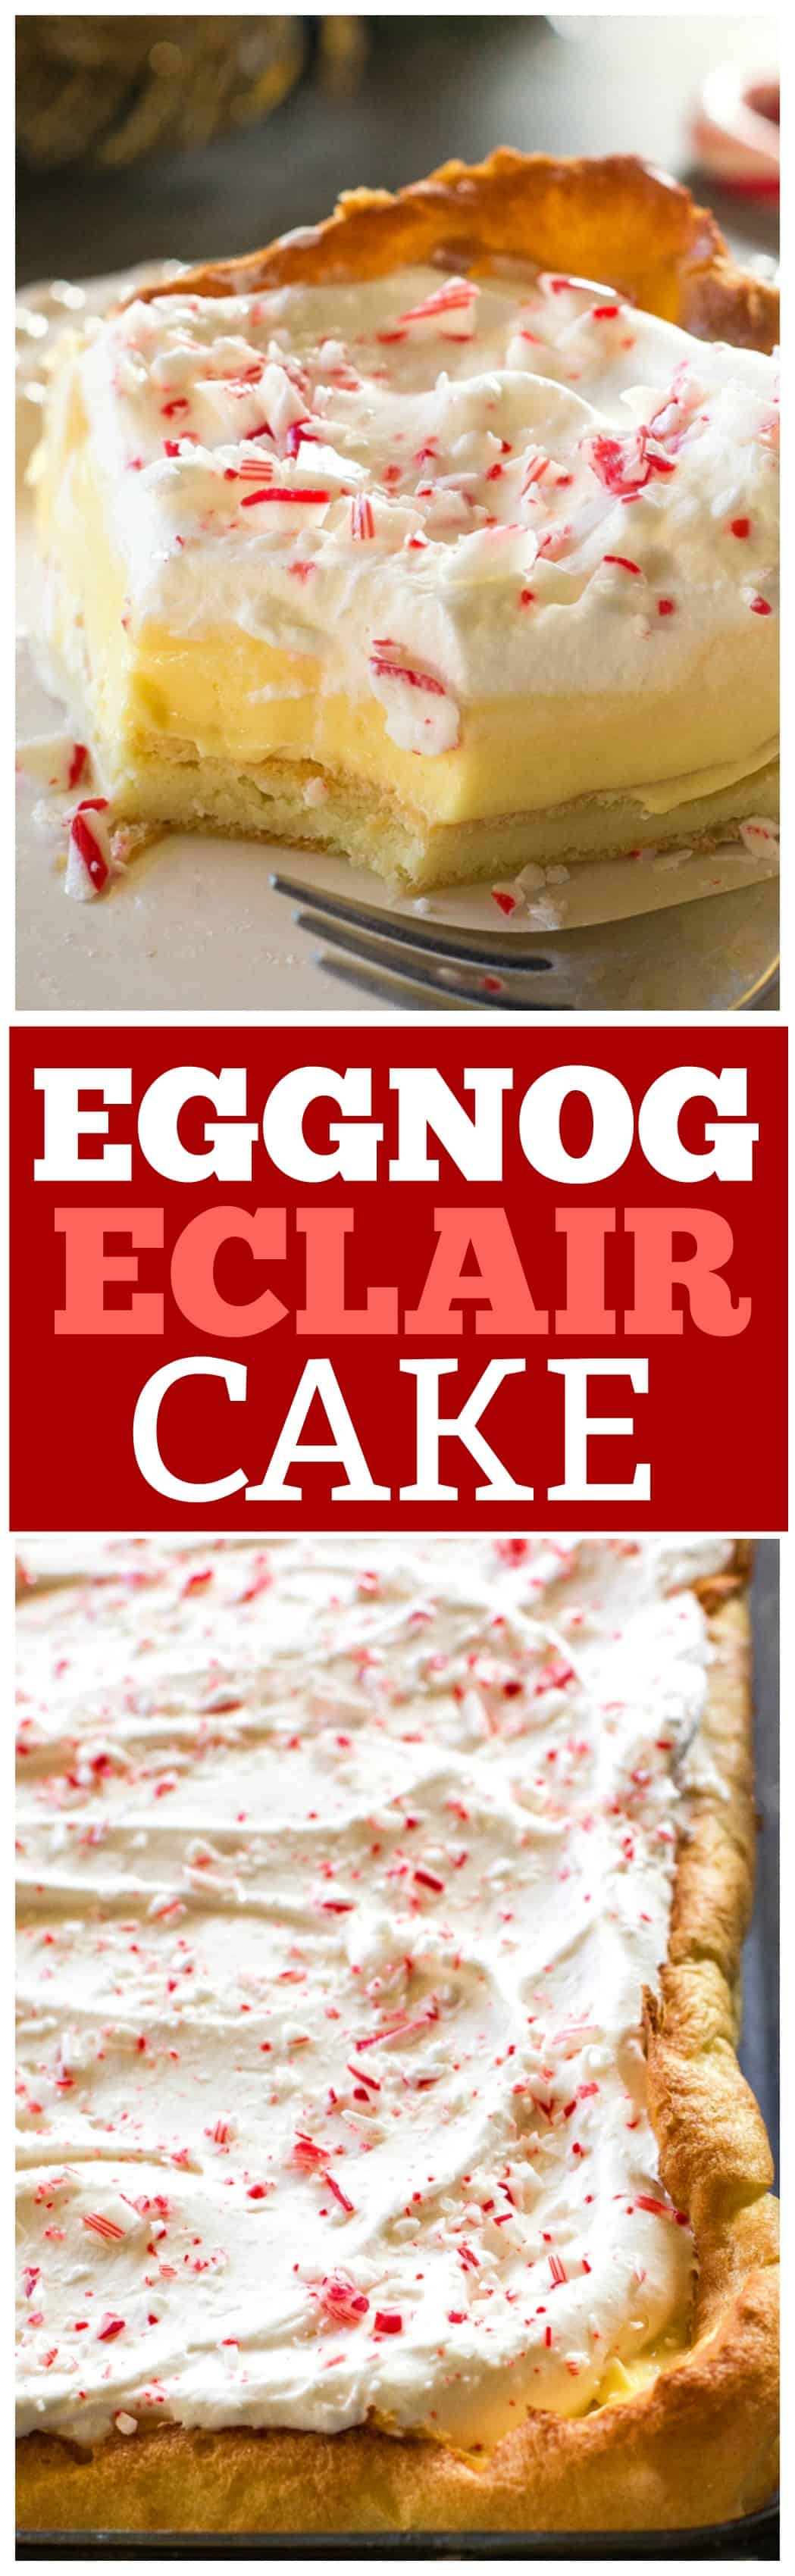 This Eggnog Éclair Cake is a unique holiday dessert with a cream puff crust, creamy eggnog layer, and topped with fresh cream and crushed peppermint candies. #eggnog #eclair #cake #dessert #christmas